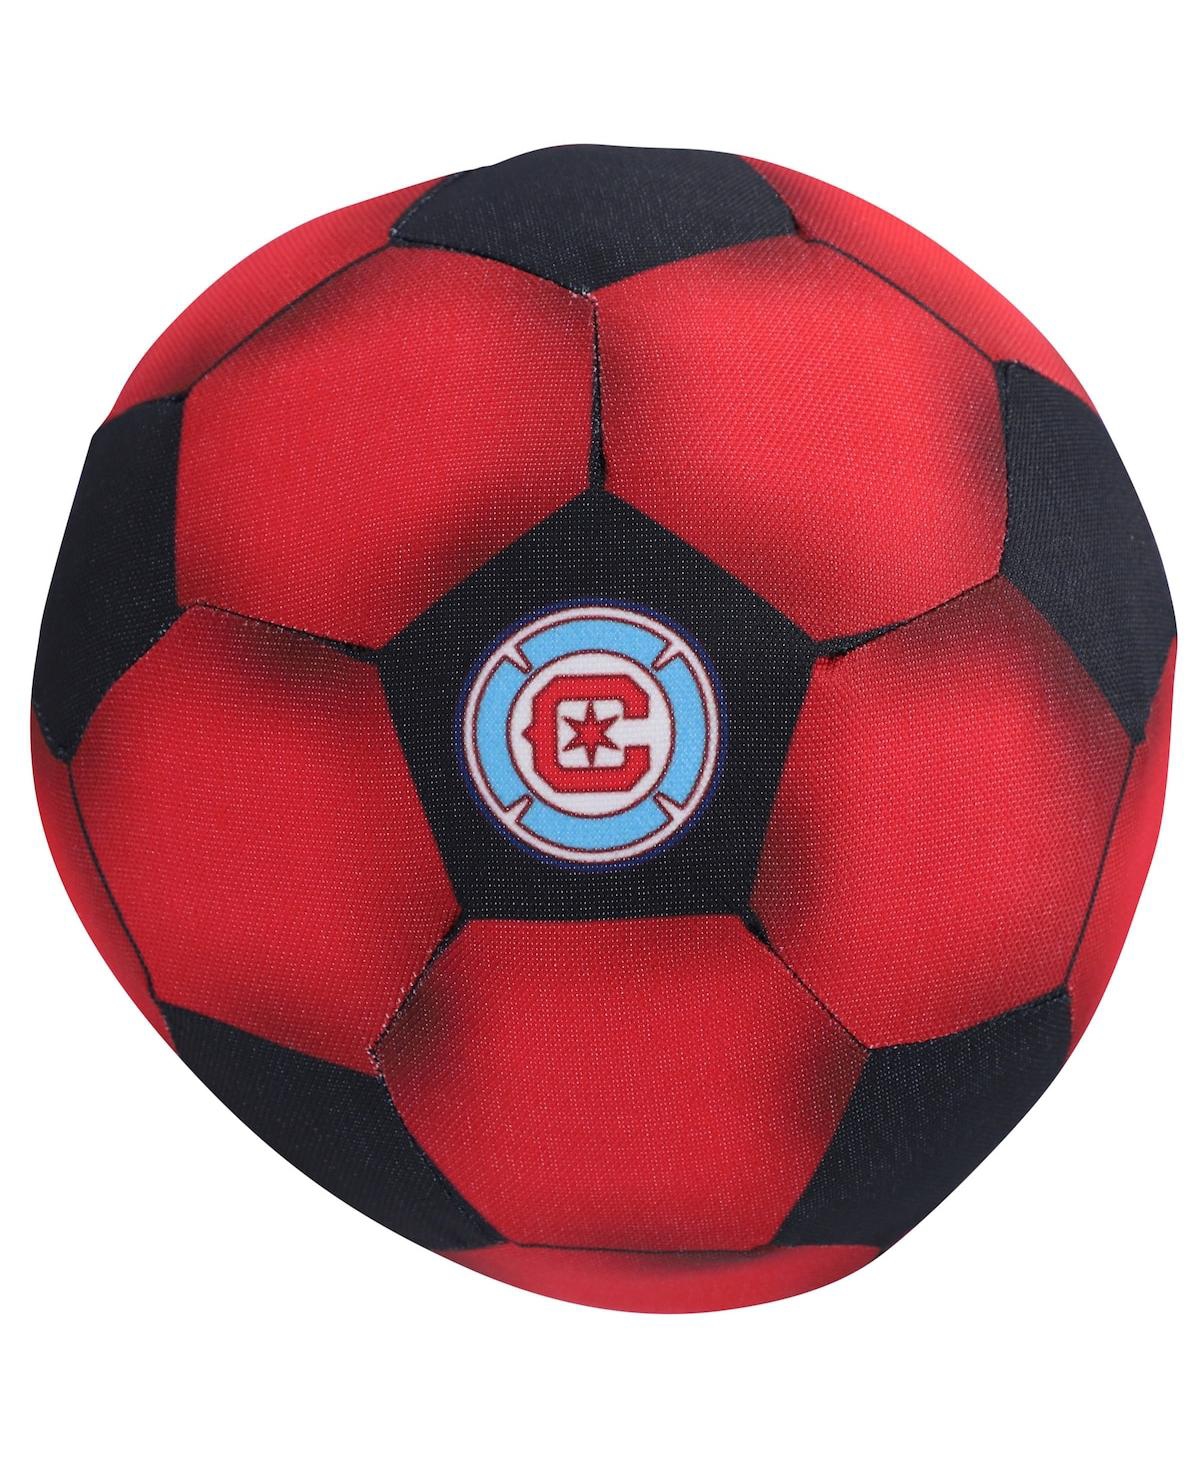 Chicago Fire Soccer Ball Plush Dog Toy - Red